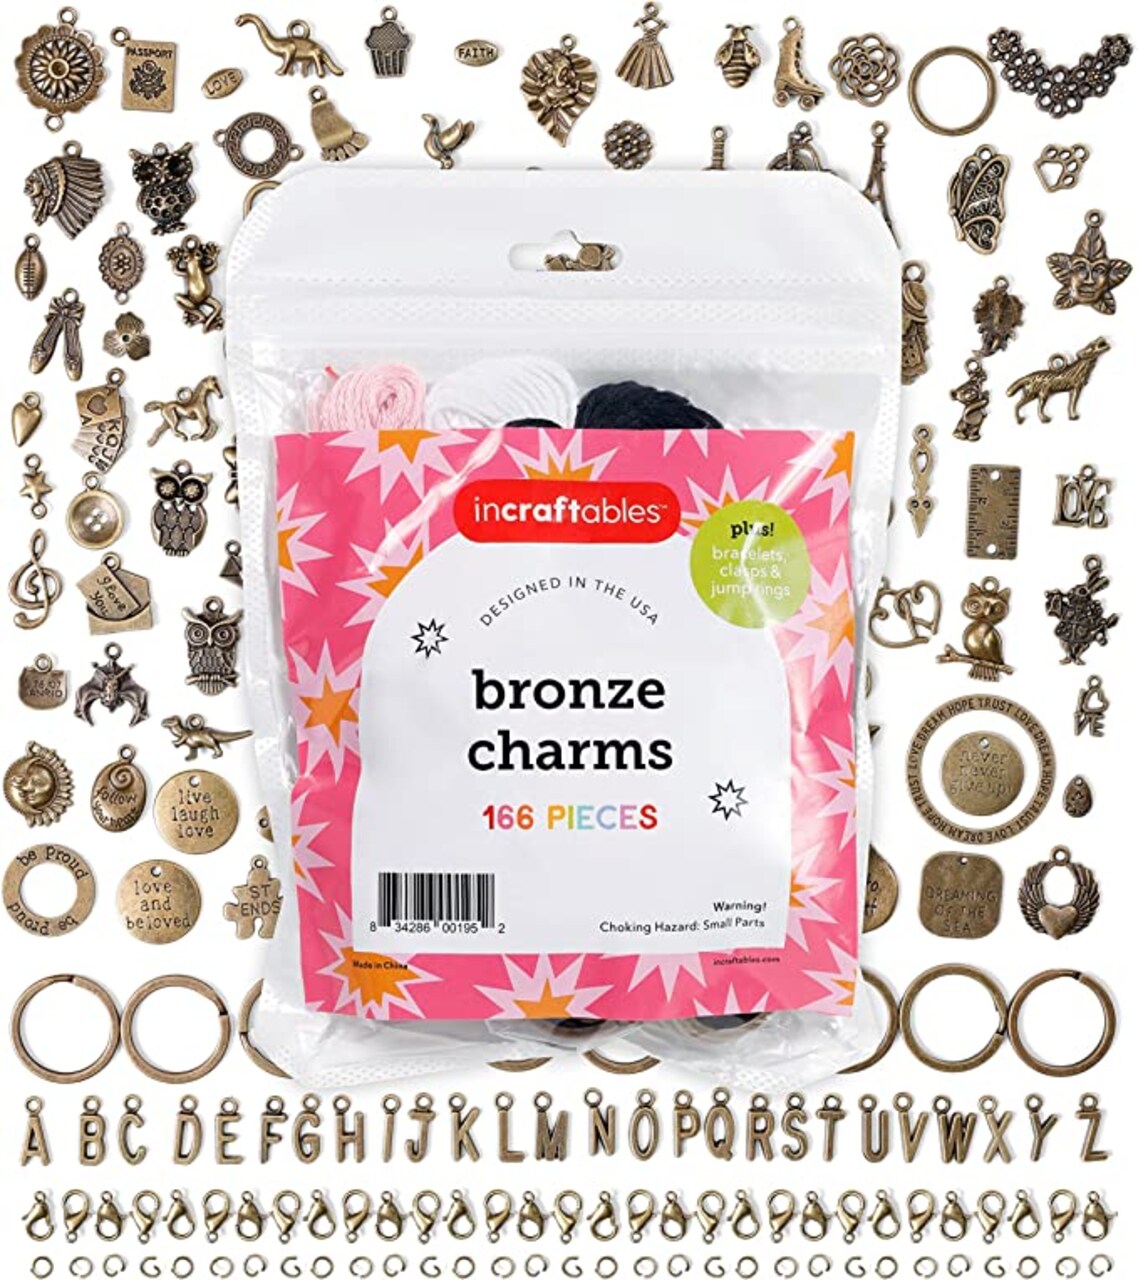 Incraftables 166pcs Bronze Charms Set for Jewelry Making. Bulk DIY Necklace,  Bracelet, Bangle & Keychain Making Kit w/ 120pcs Antique Charms (Small &  Large), 20pcs Word Charms & 26pcs A-Z Letter Charm